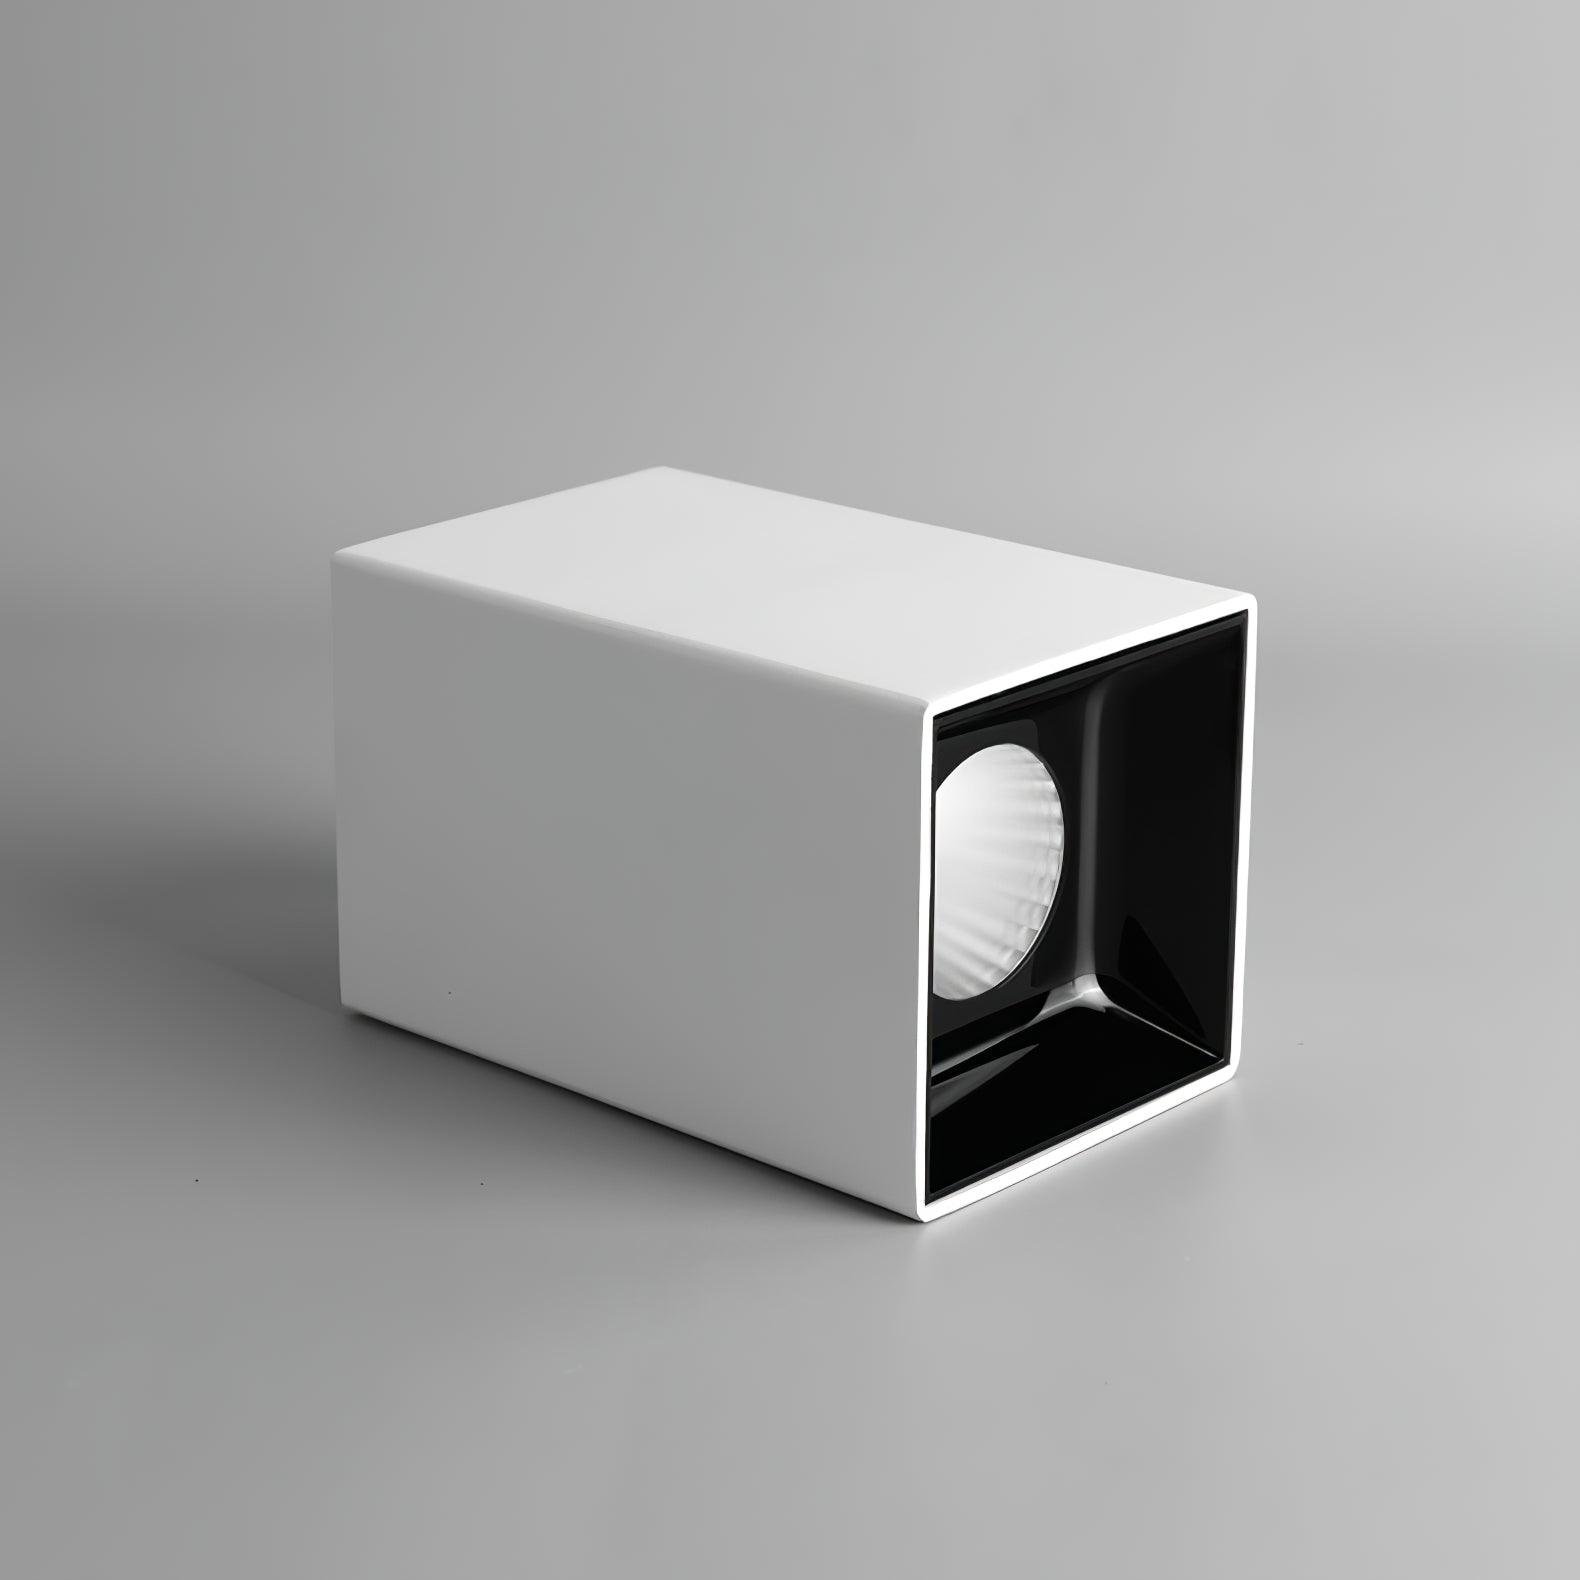 10 Cube Spotlights Set in White with Cool Light, Dimensions: 3" Diameter x 3.7" Height